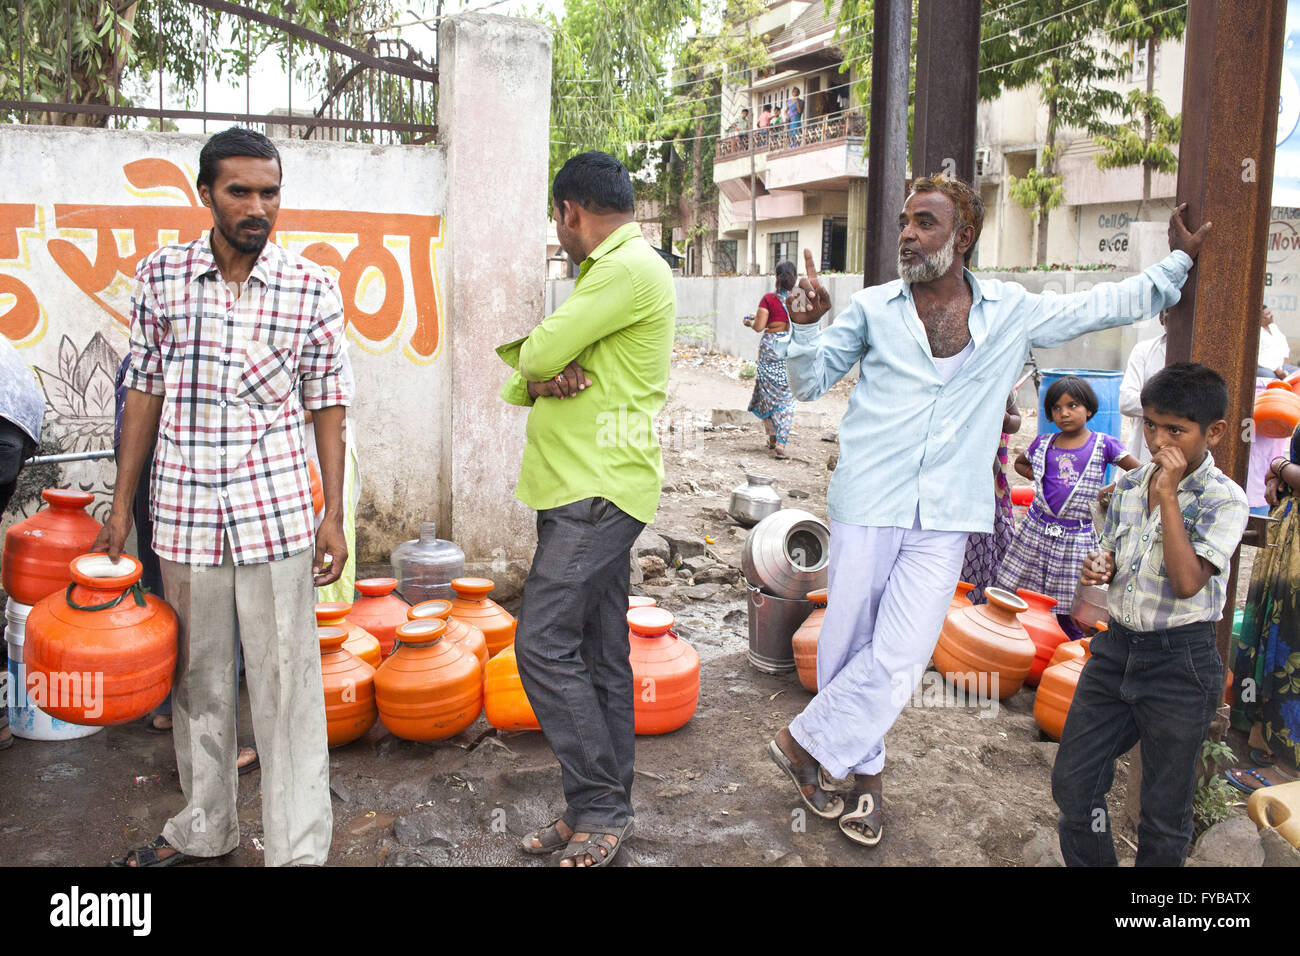 Latur, Maharashtra. 20th Apr, 2016. 20 April 2016 - Latur - INDIA.Frequent quarrels have become common place at the site of water collection points in Latur. © Subhash Sharma/ZUMA Wire/Alamy Live News Stock Photo